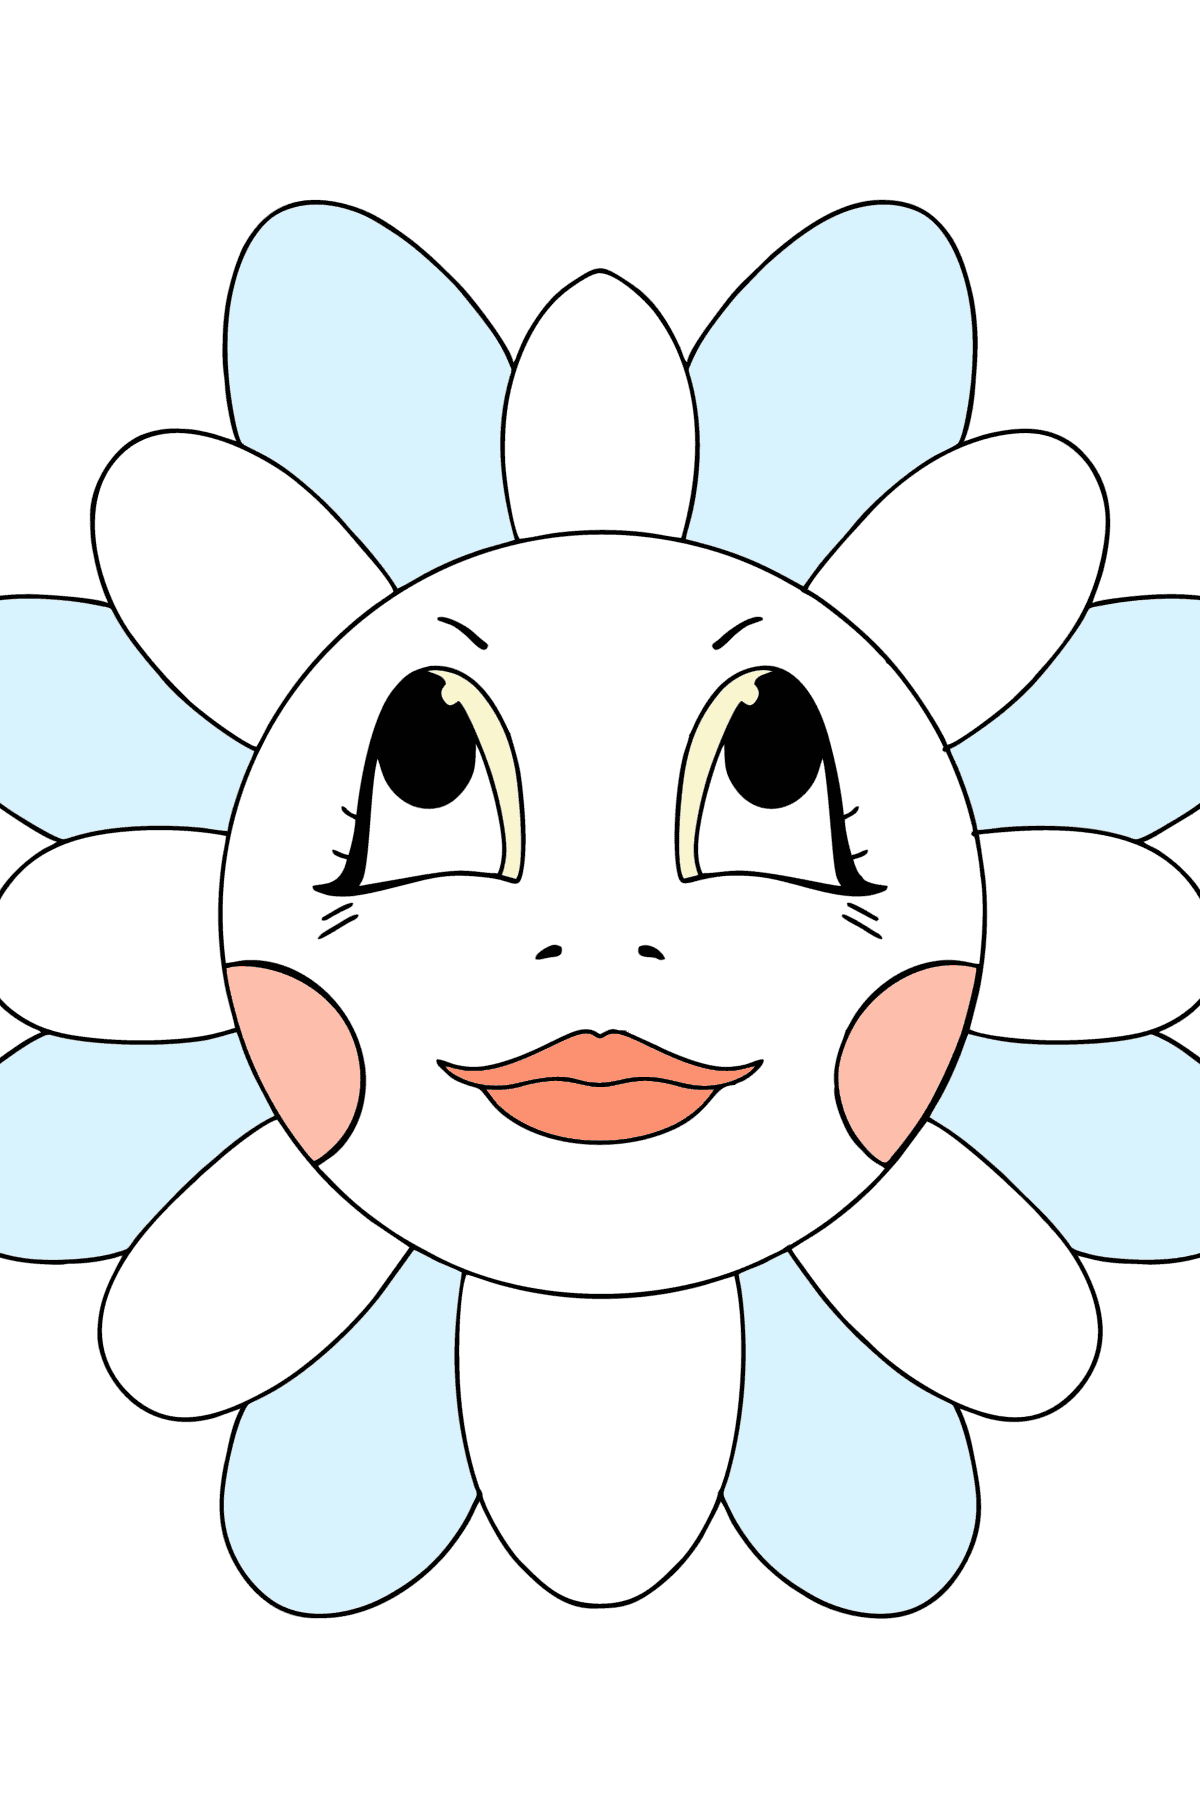 Chamomile with eyes coloring page - Coloring Pages for Kids